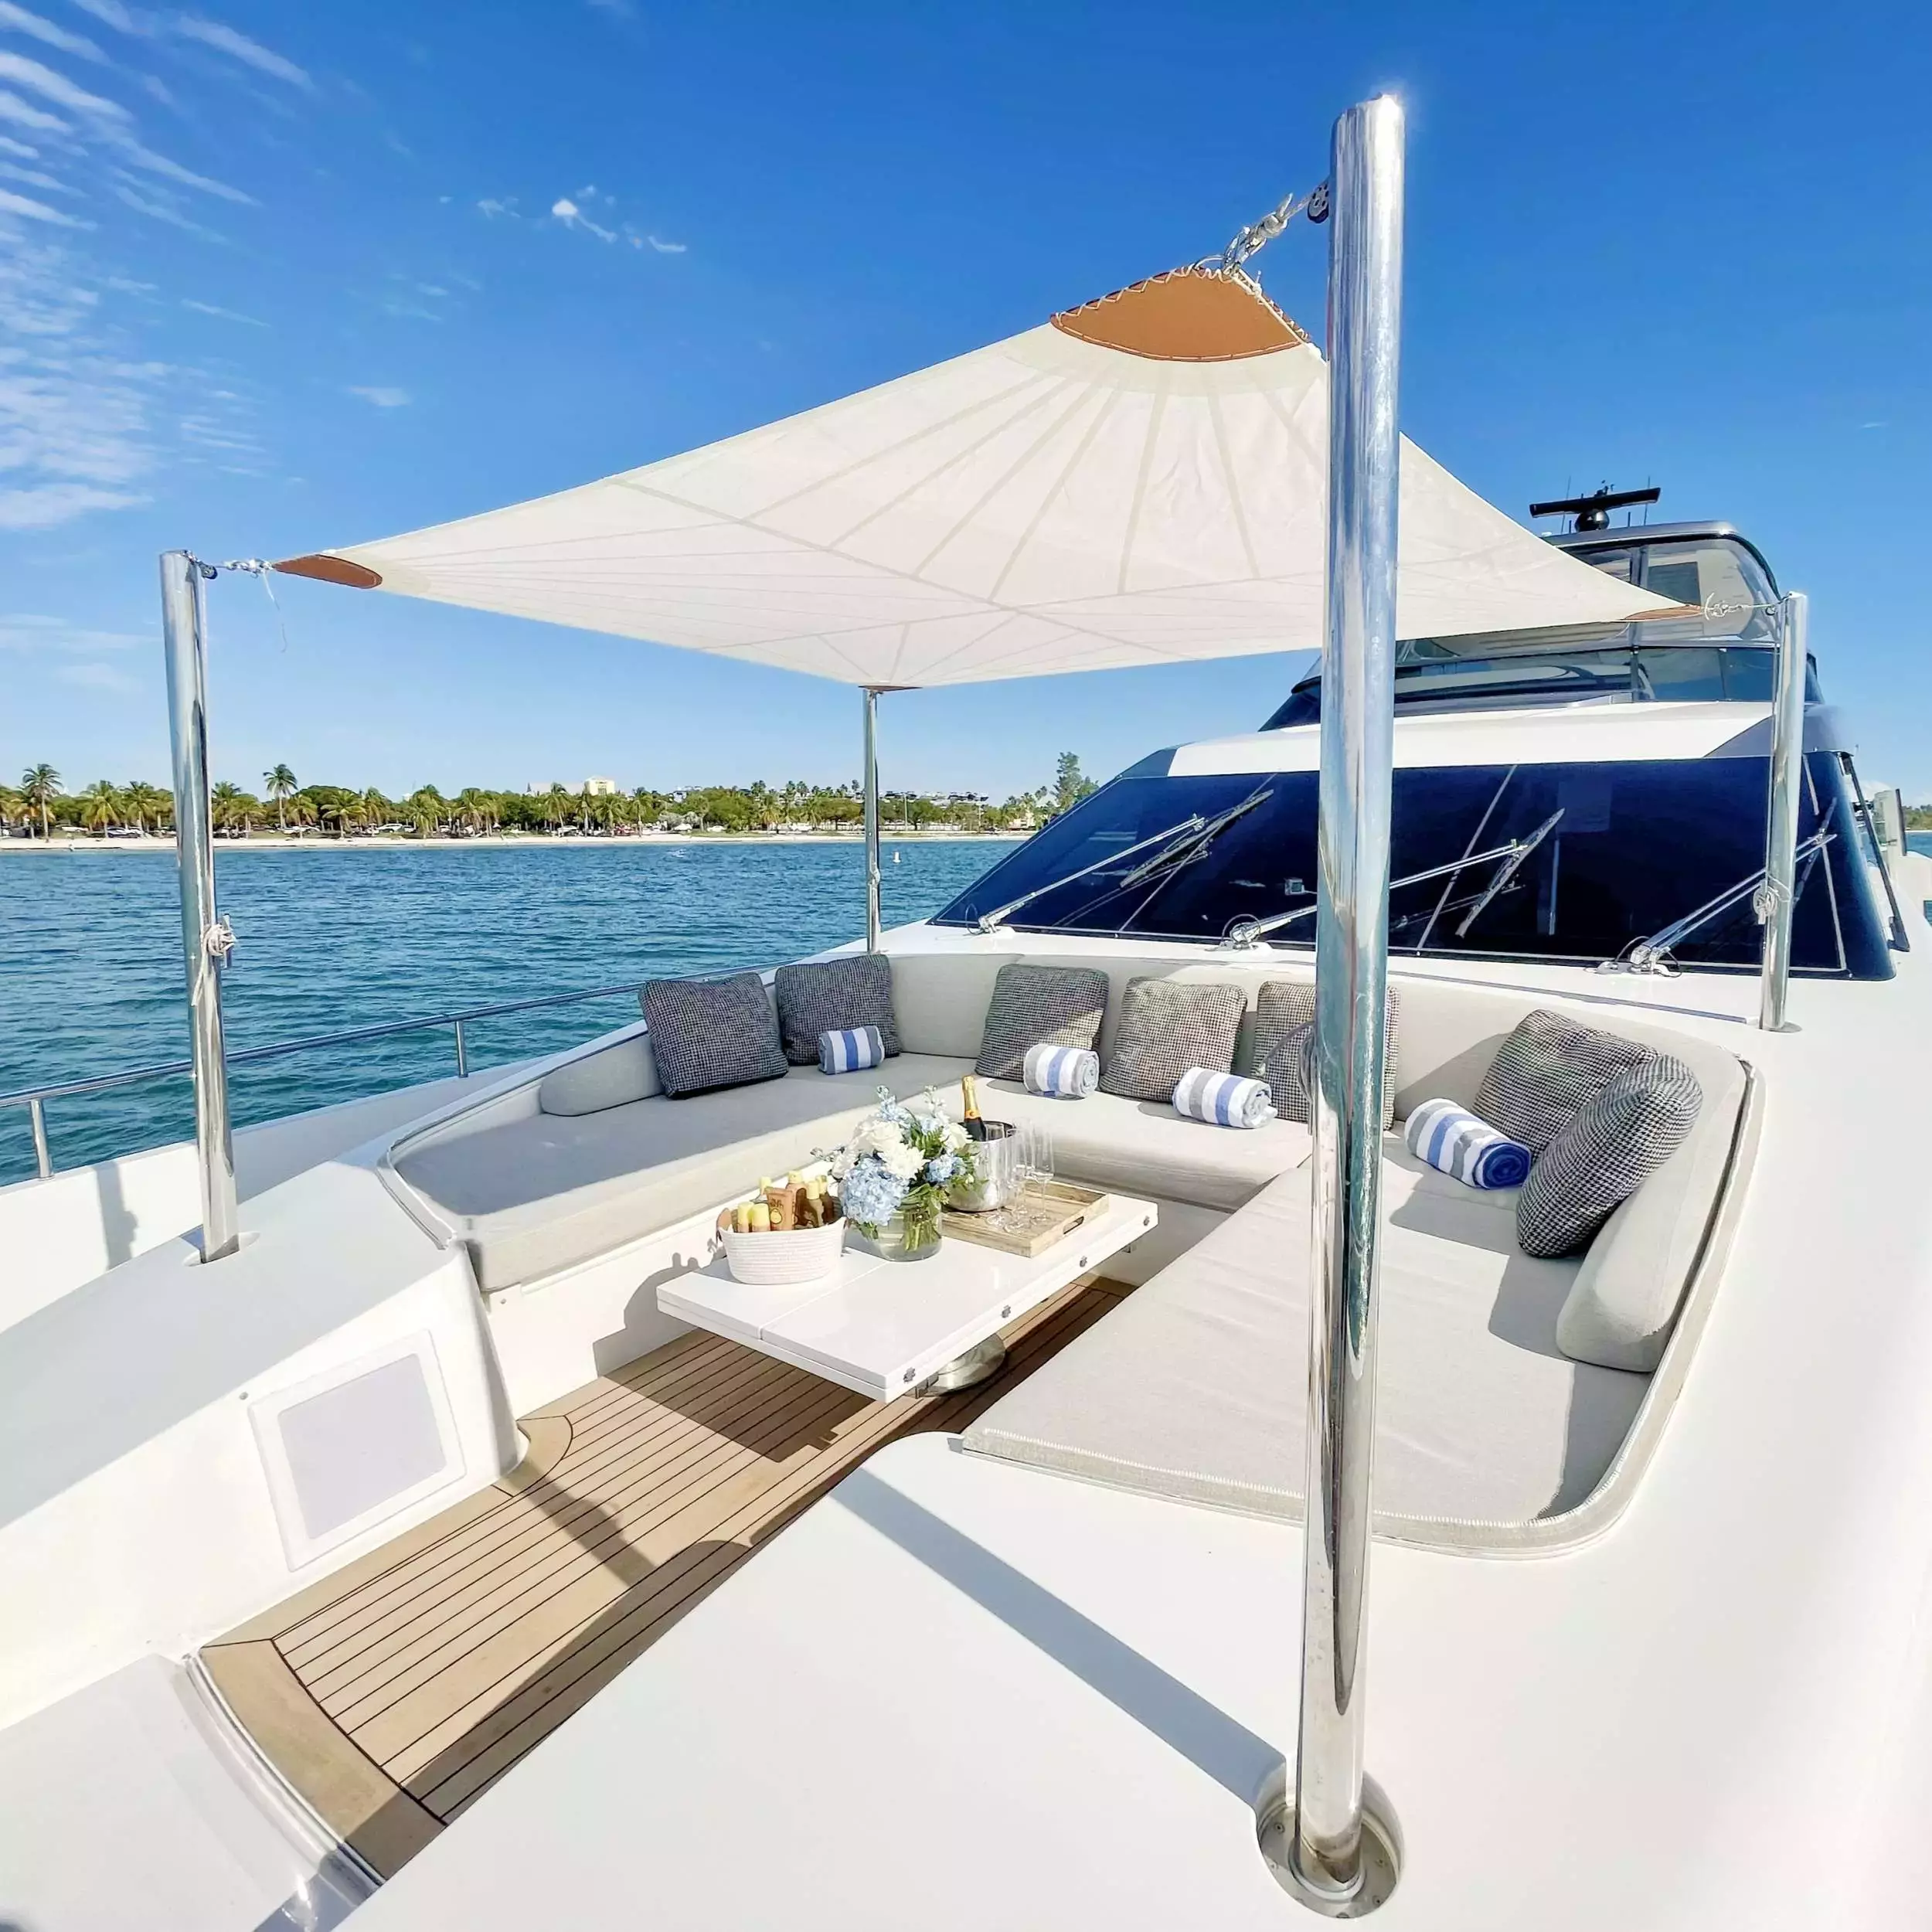 C-Daze by Sanlorenzo - Special Offer for a private Motor Yacht Charter in Miami with a crew